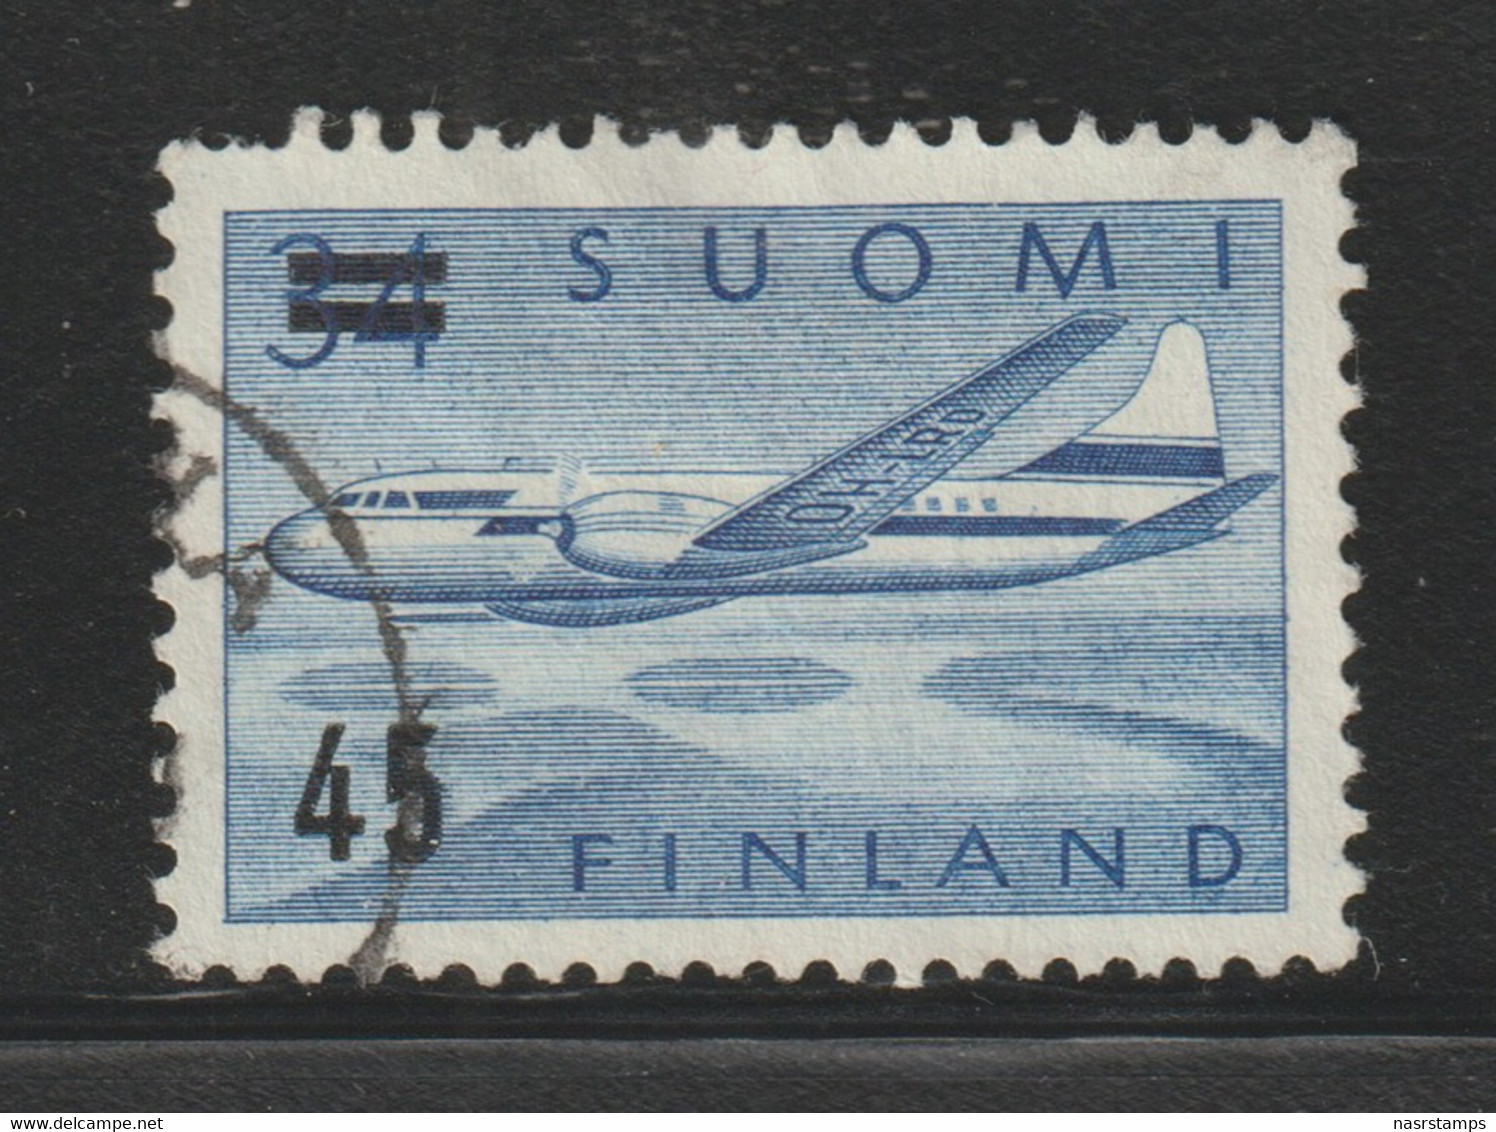 FINLAND - 1959 - ( Convair 440 Over Lakes - 45m On 34m ) - As Scan - Used Stamps